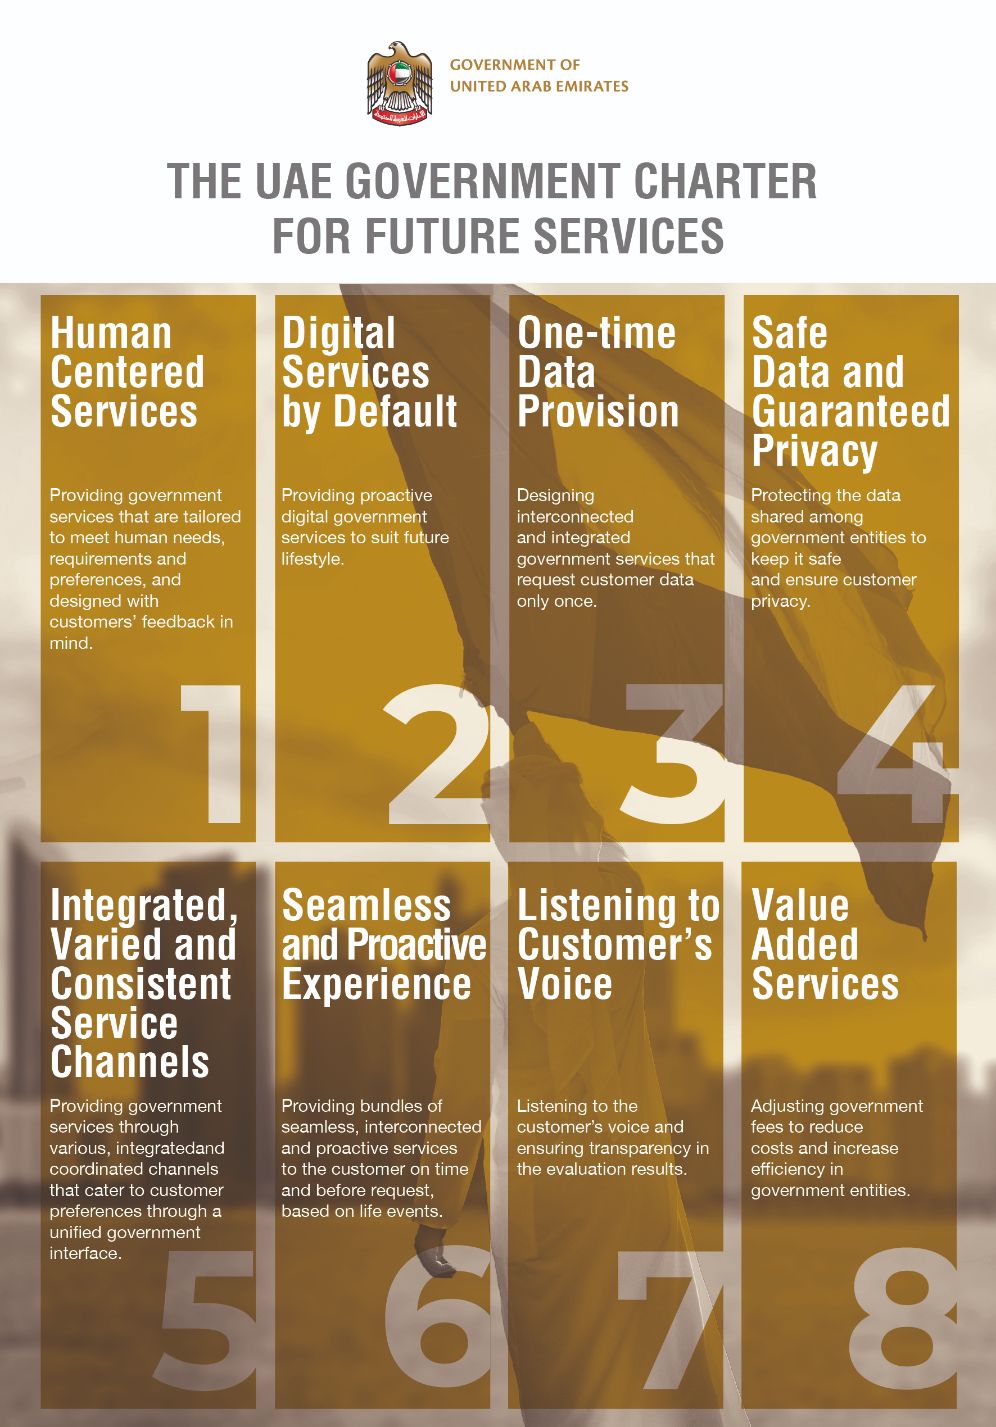  The UAE Government Charter for Future services